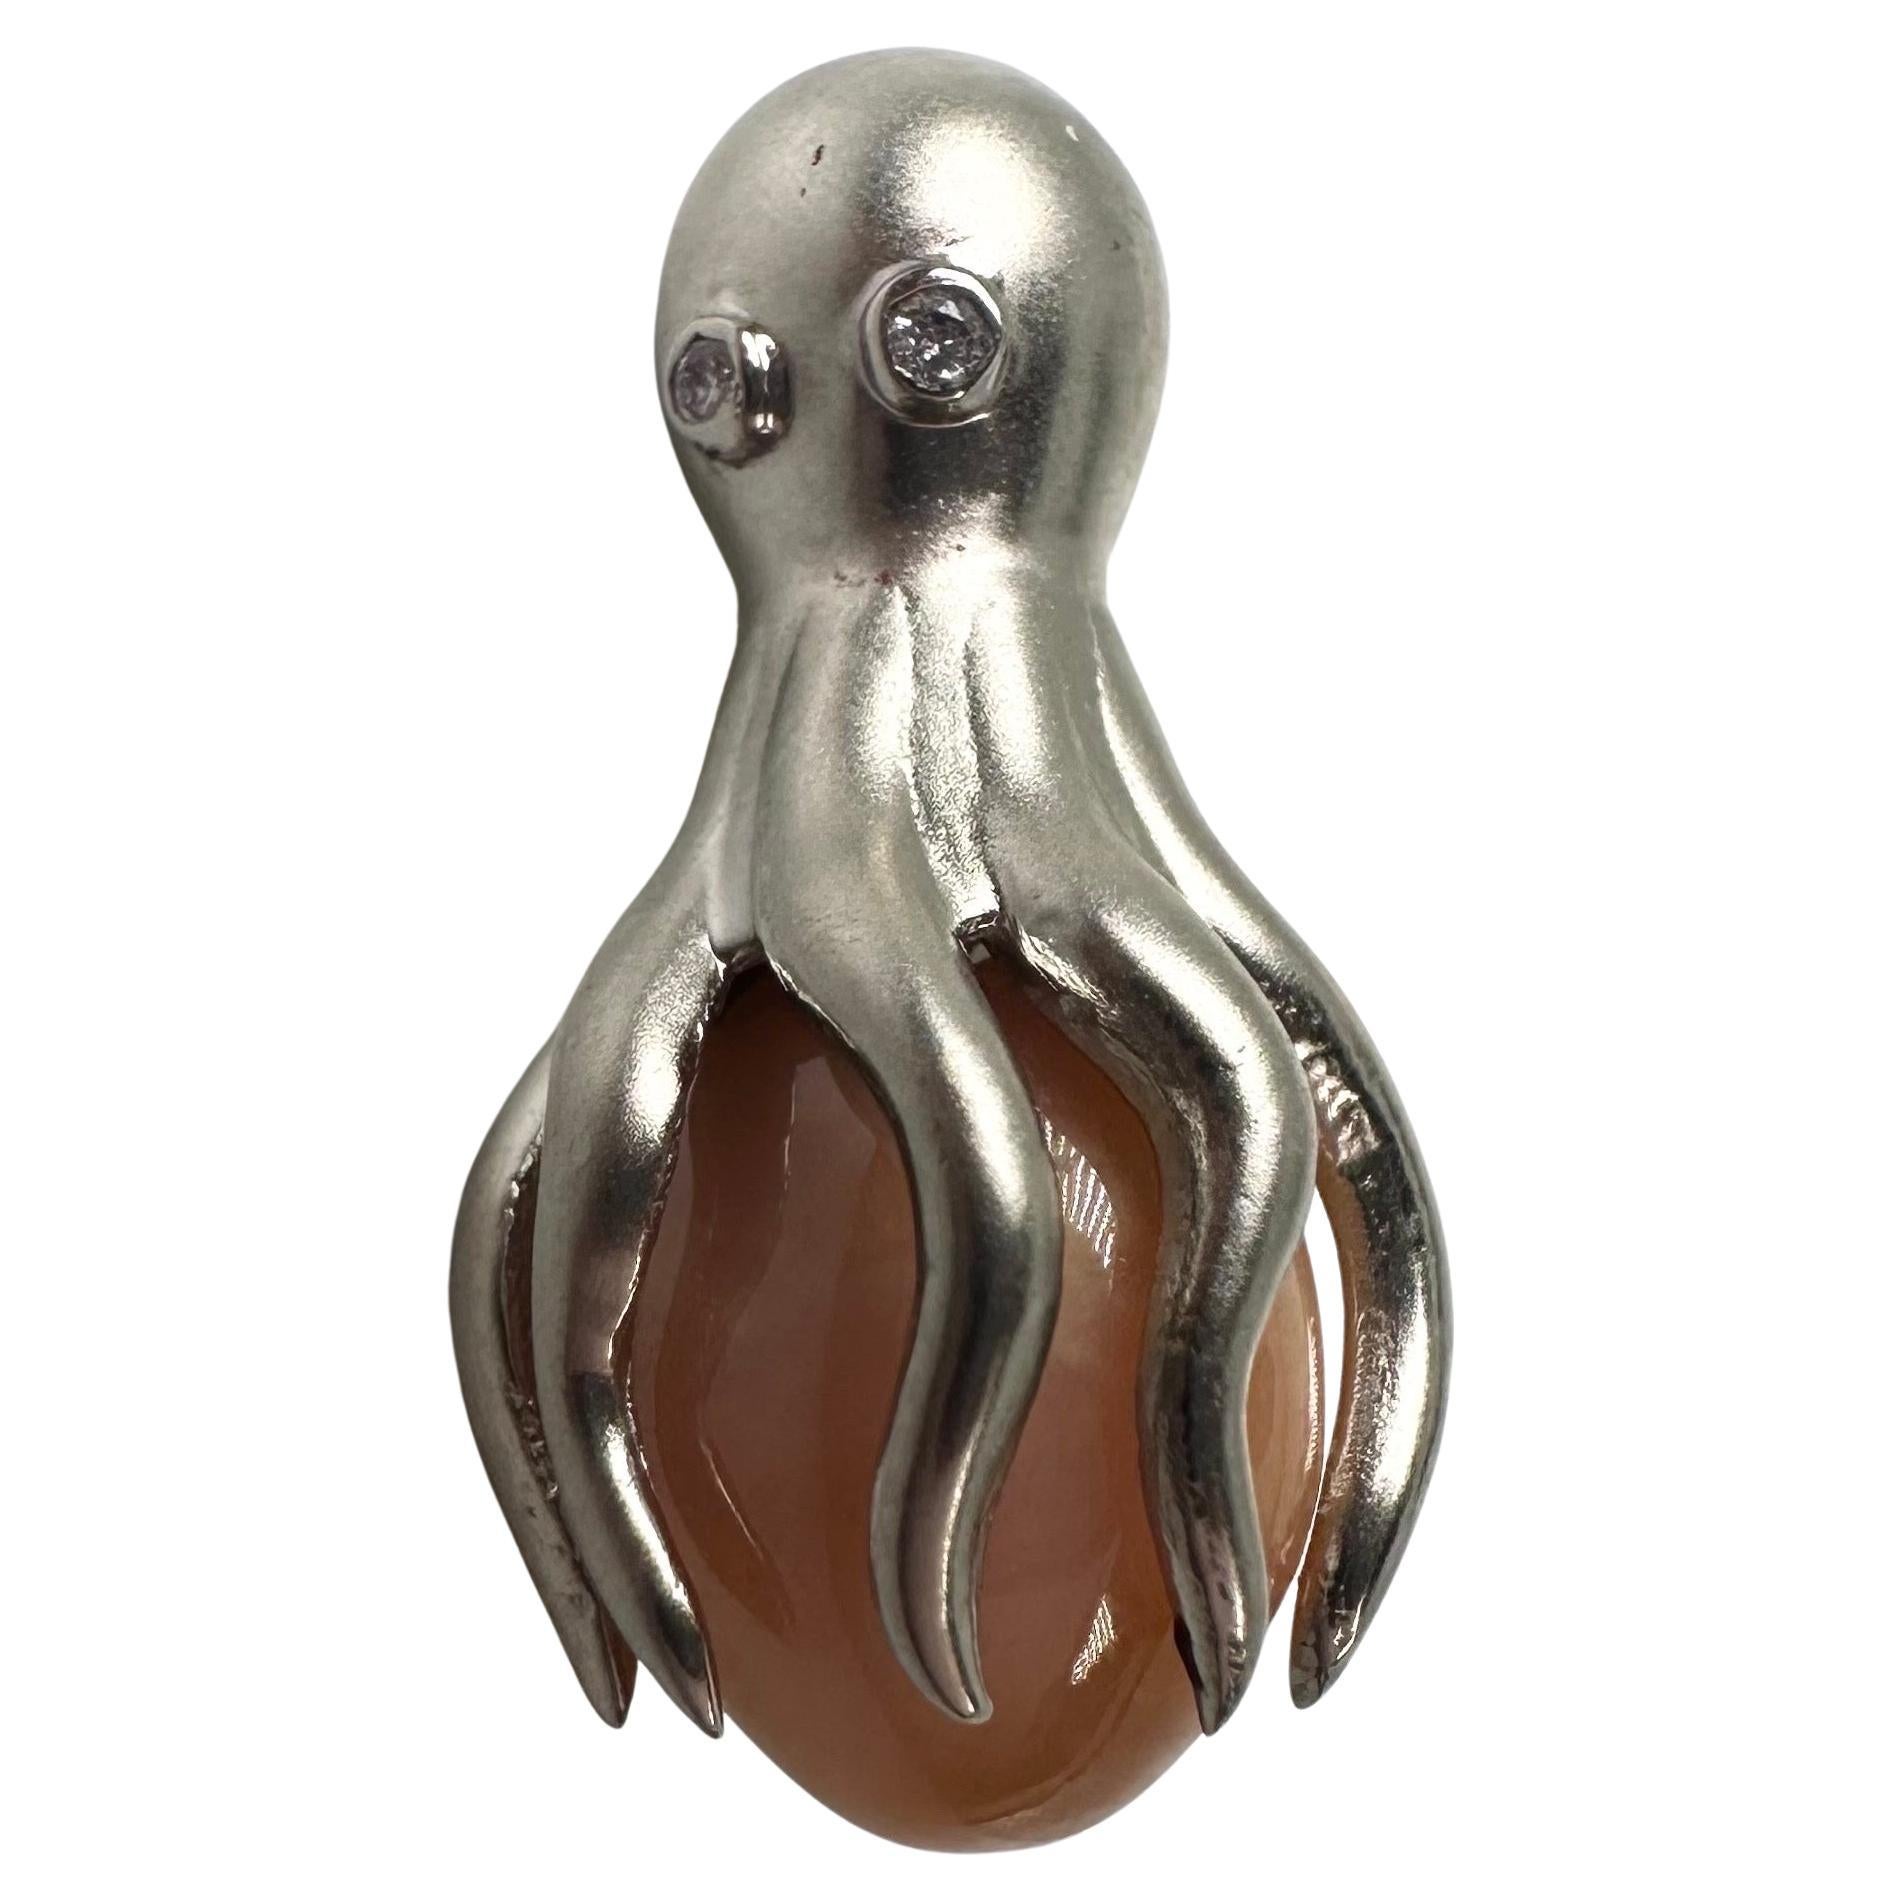 Rare conch pearl pendant octopus pendant 14KT gold For Sale